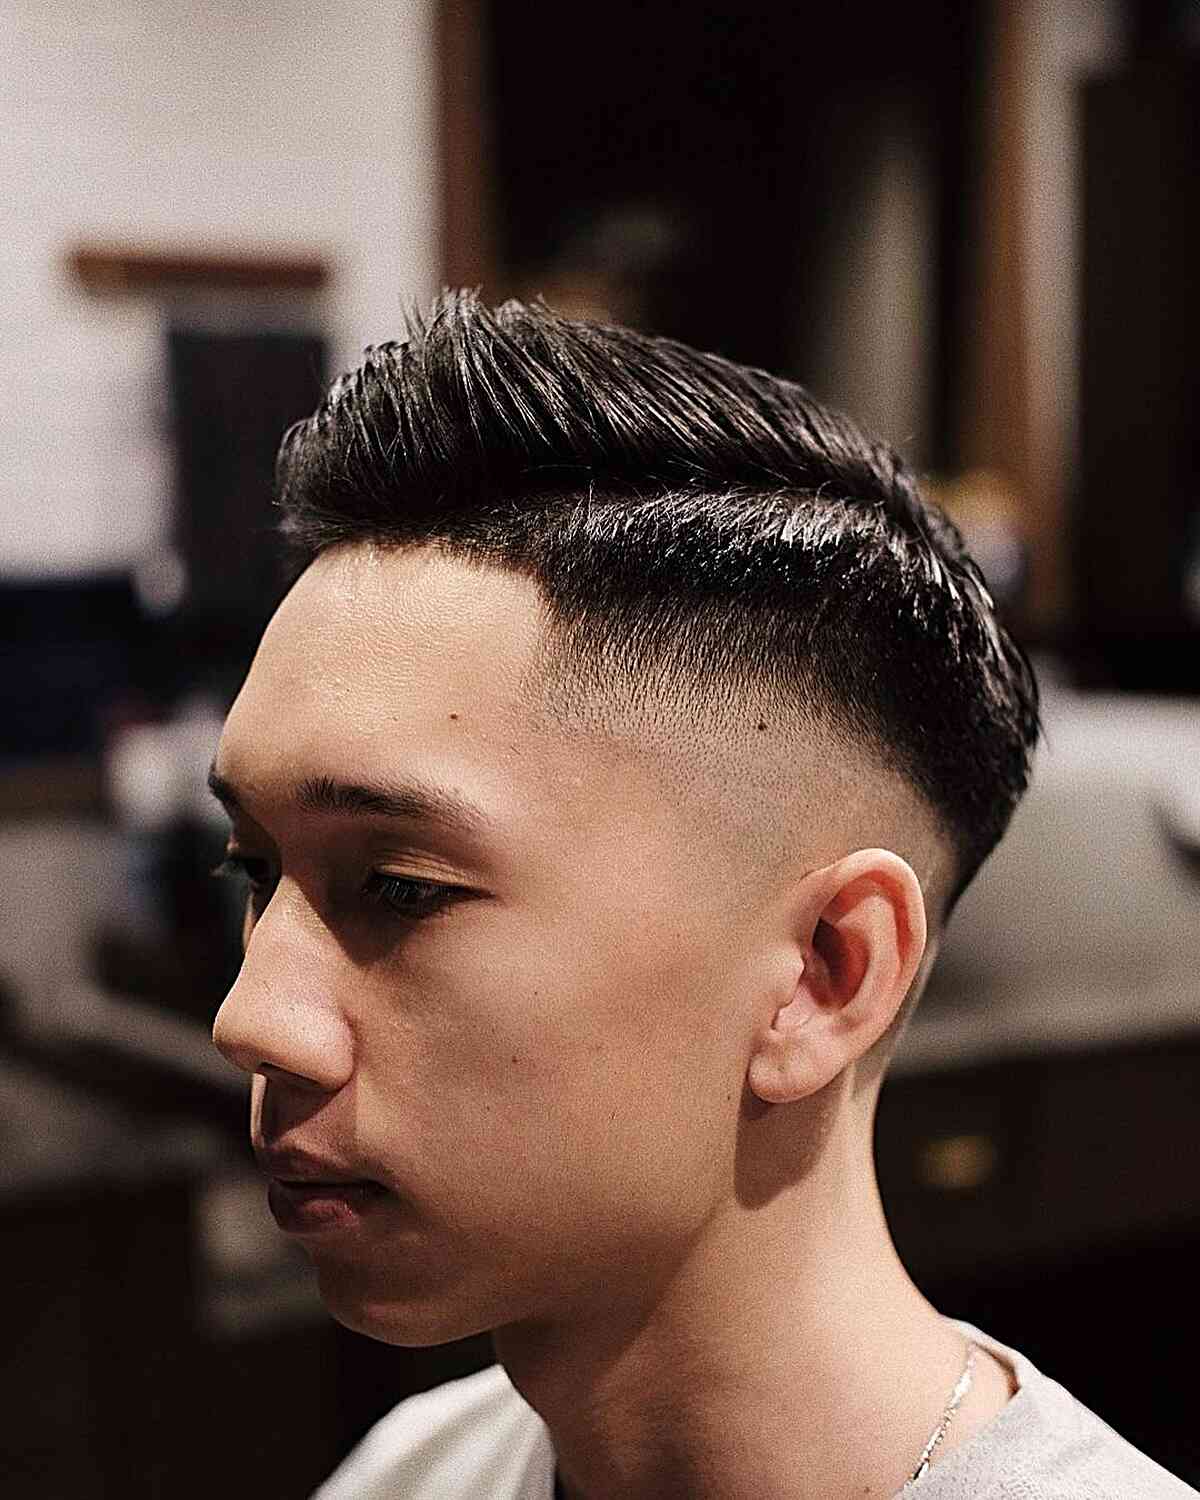 The Tapered Ivy League Cut